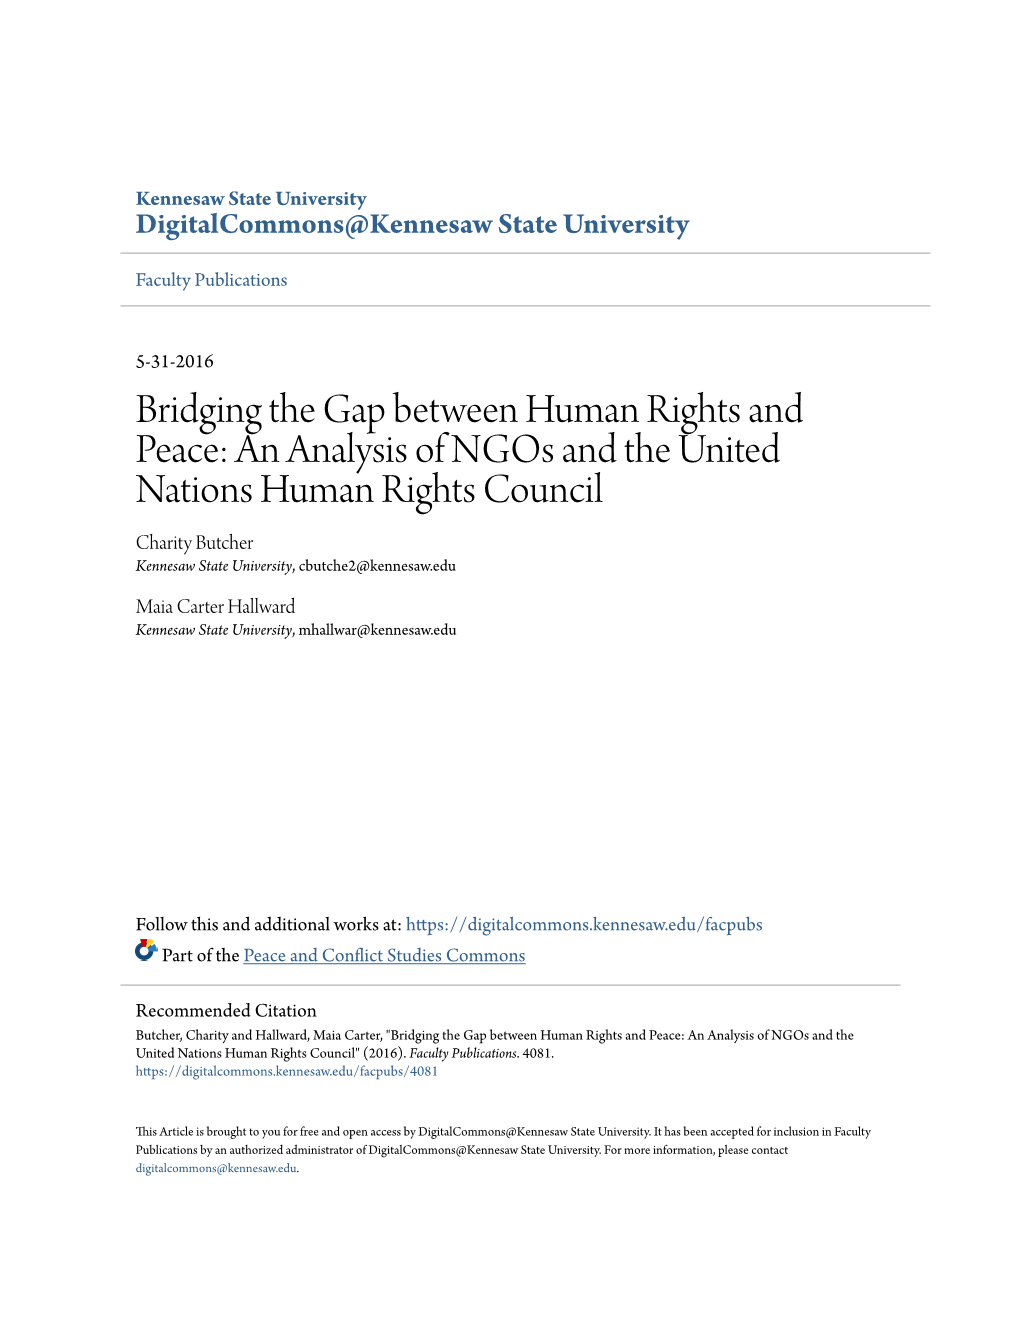 Bridging the Gap Between Human Rights and Peace